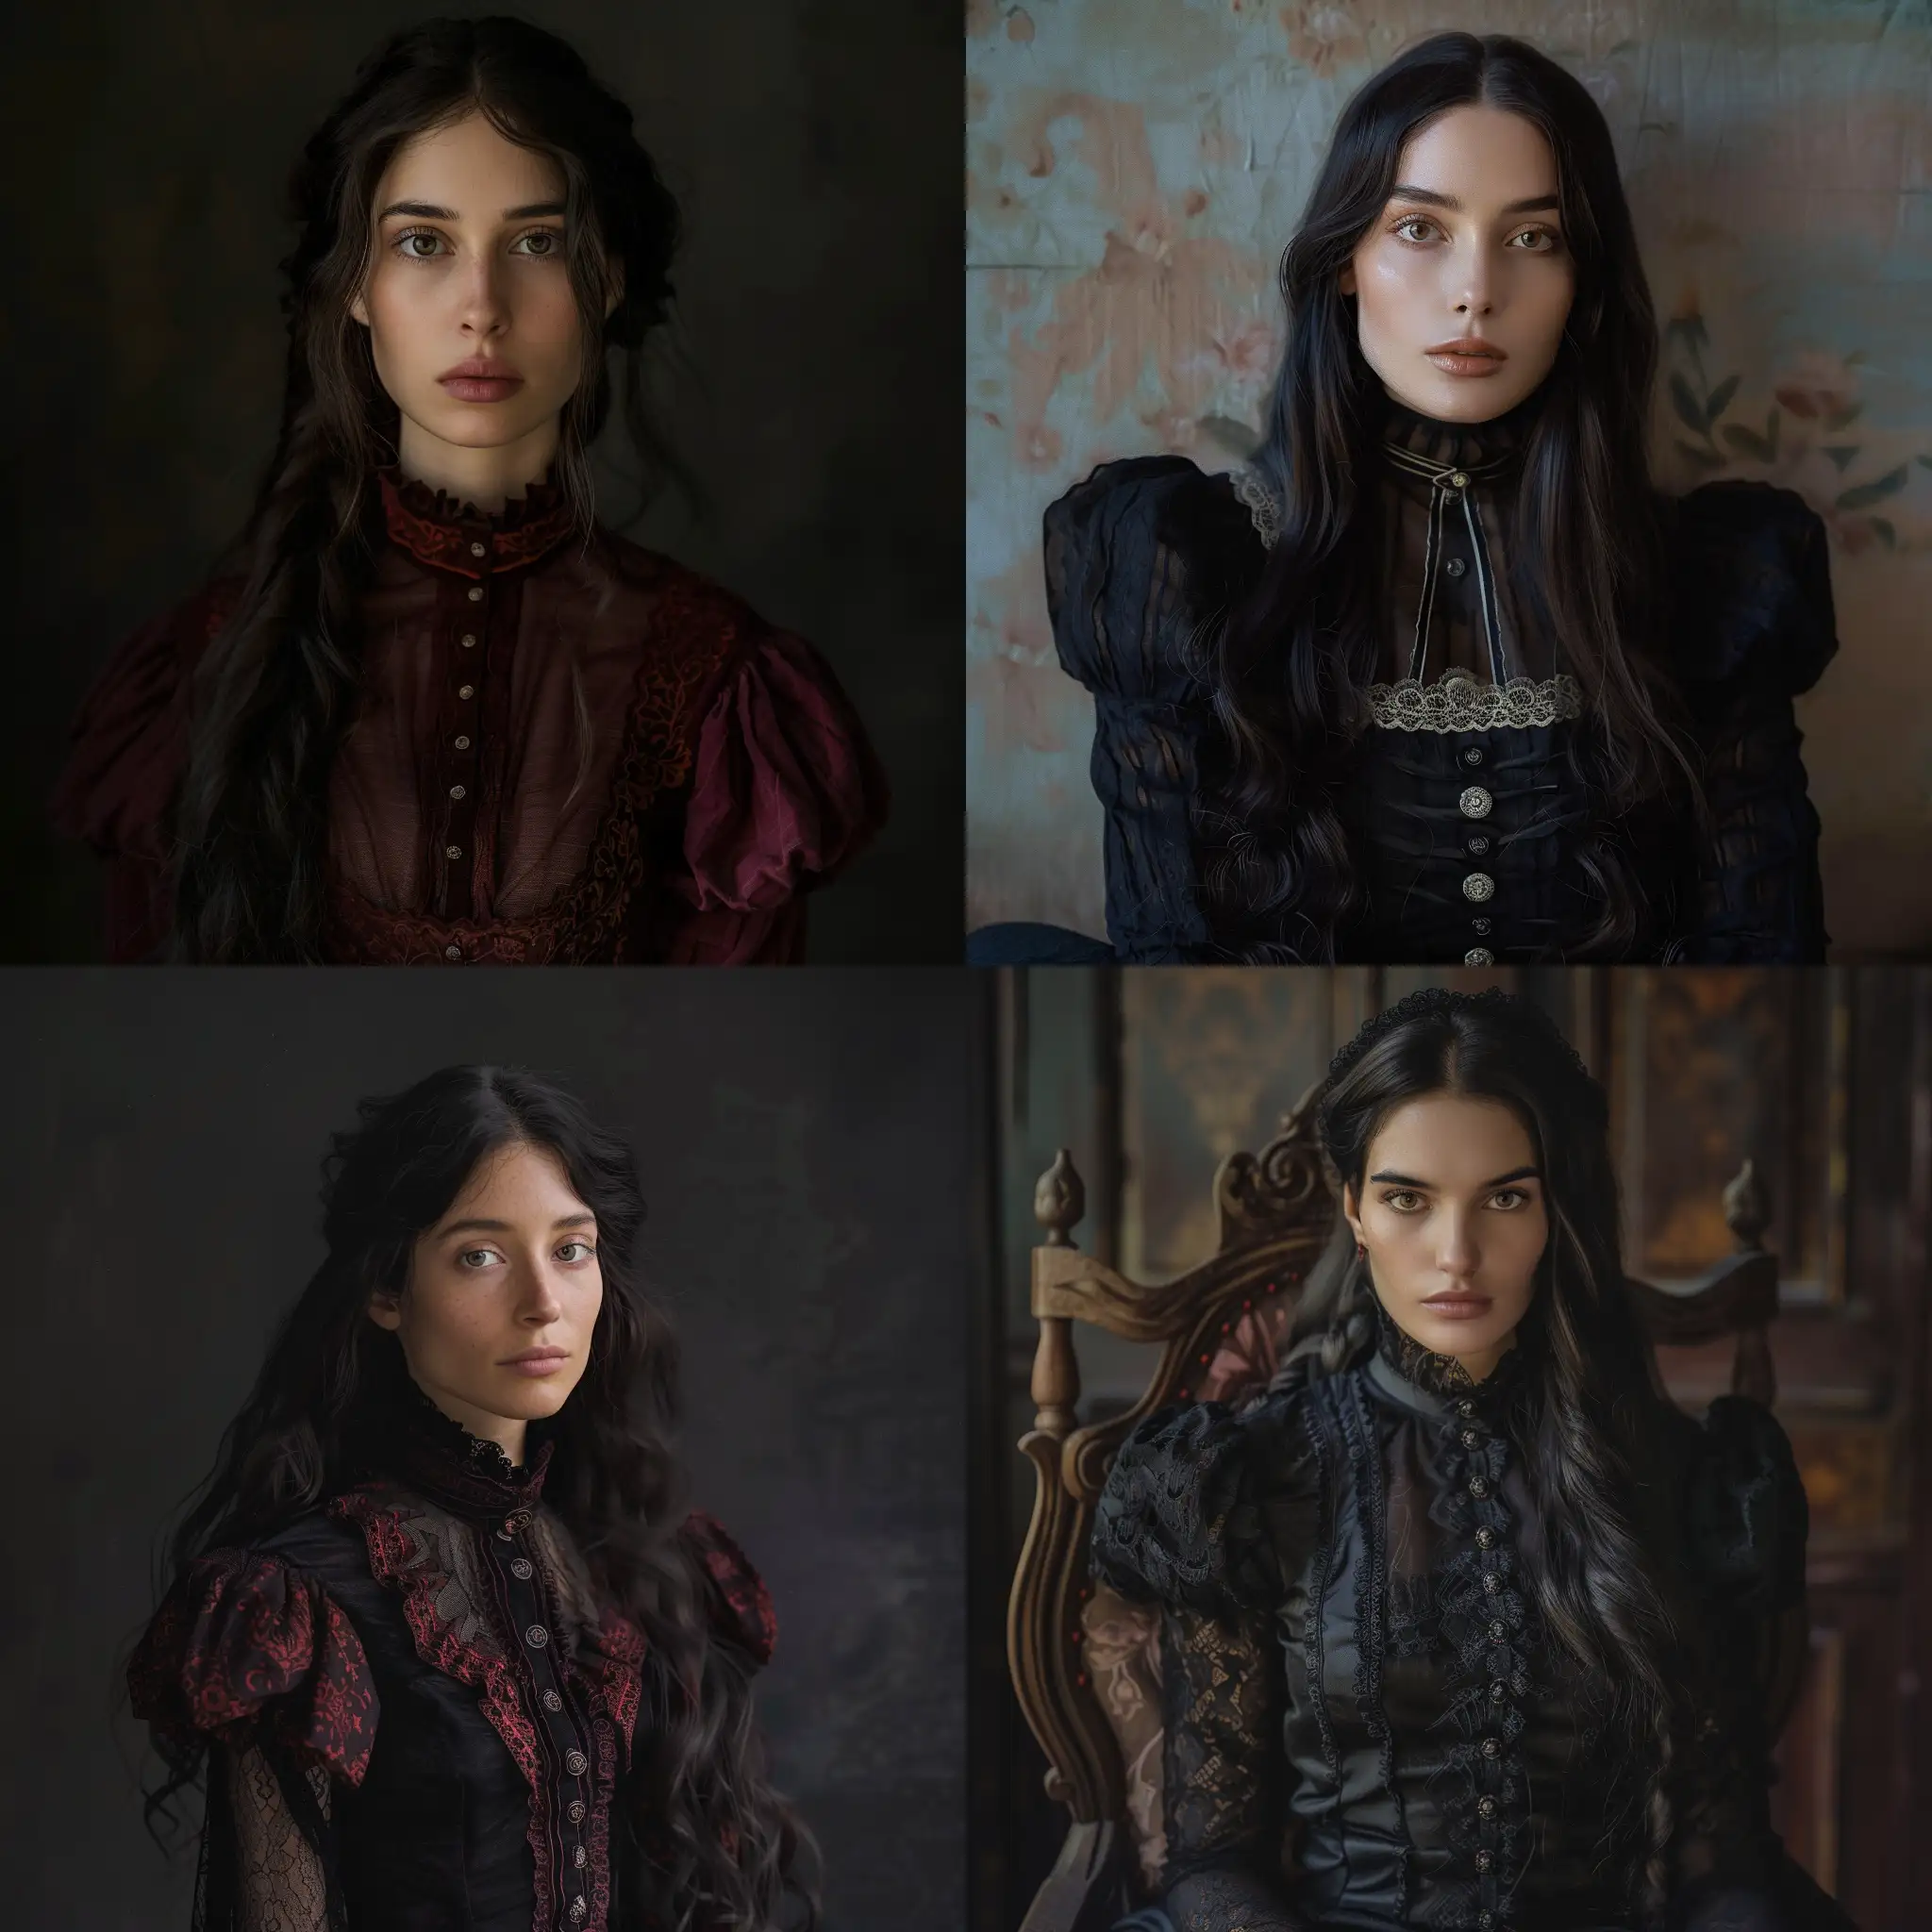 25 years old woman, long dark hair, superreal, no contrast, soft shadows, sharp focus, full body shot, dark and little winered Victorian clothes